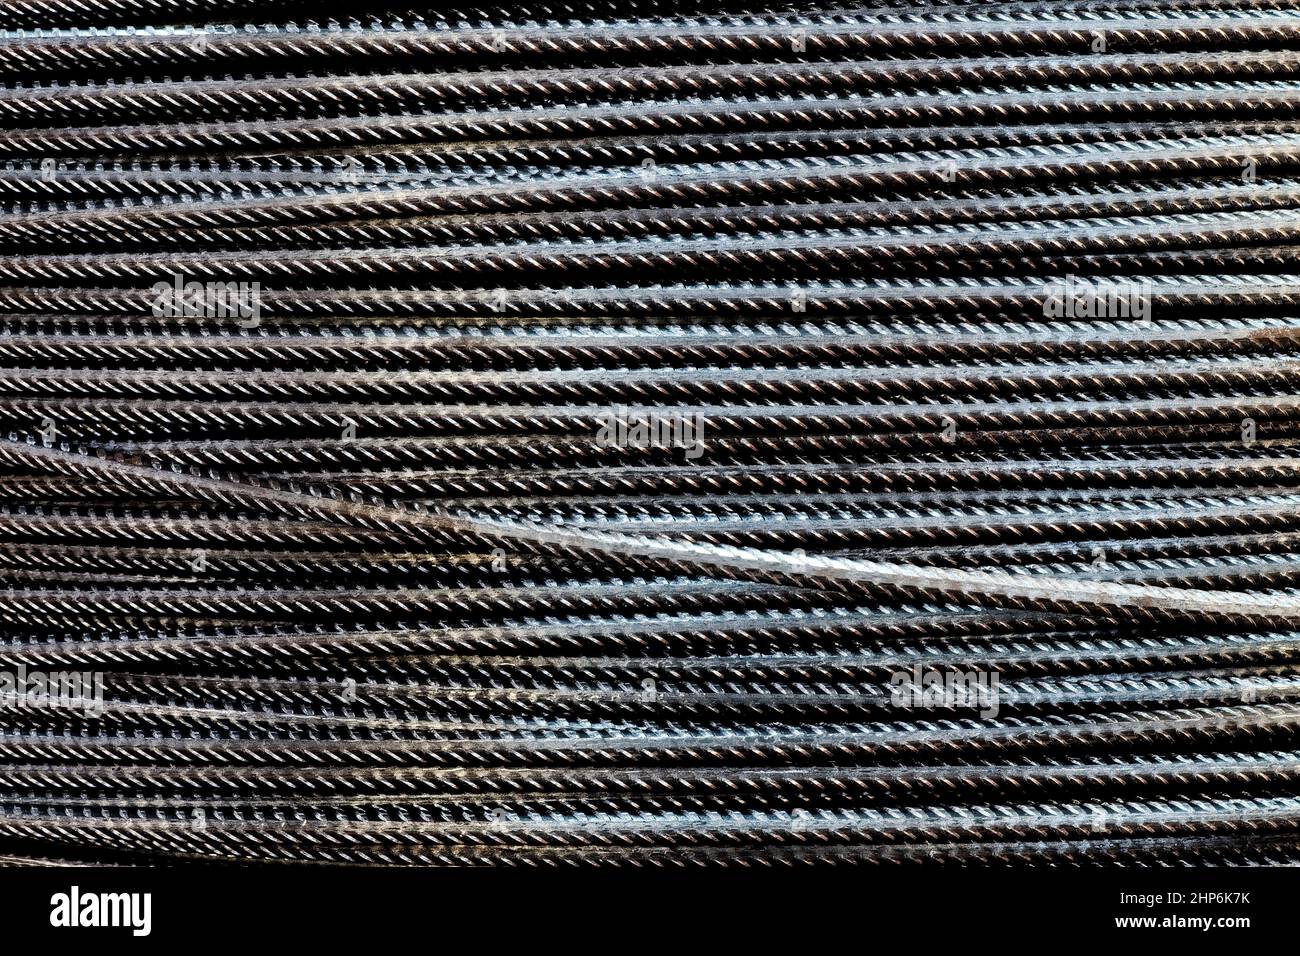 Close-up stacked wire steel rebar material, rebar for industrial and construction work, texture and background Stock Photo